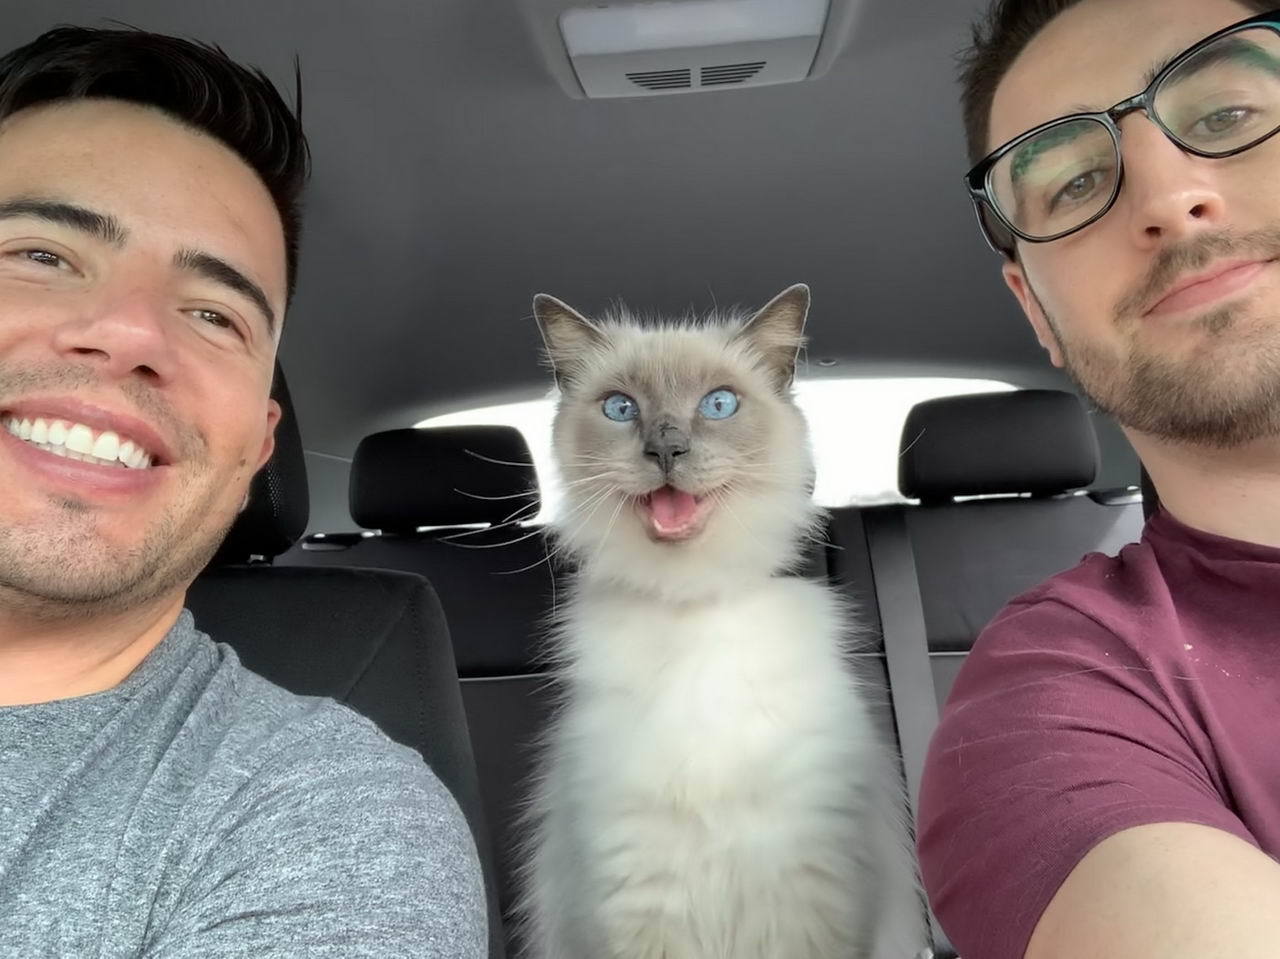 Two men and a cat in the front seat of car. The cat looks very eager.